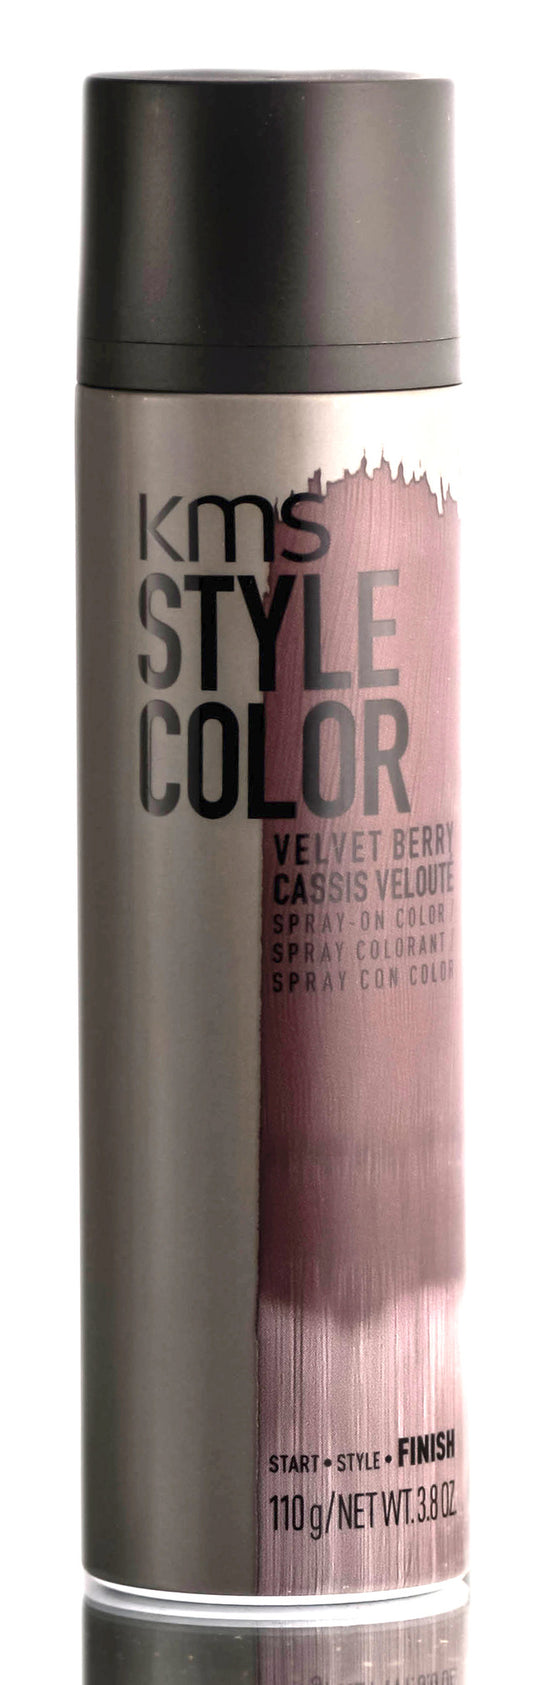 KMS Style Color Spray On Color, Velvet Berry, 3.8 oz